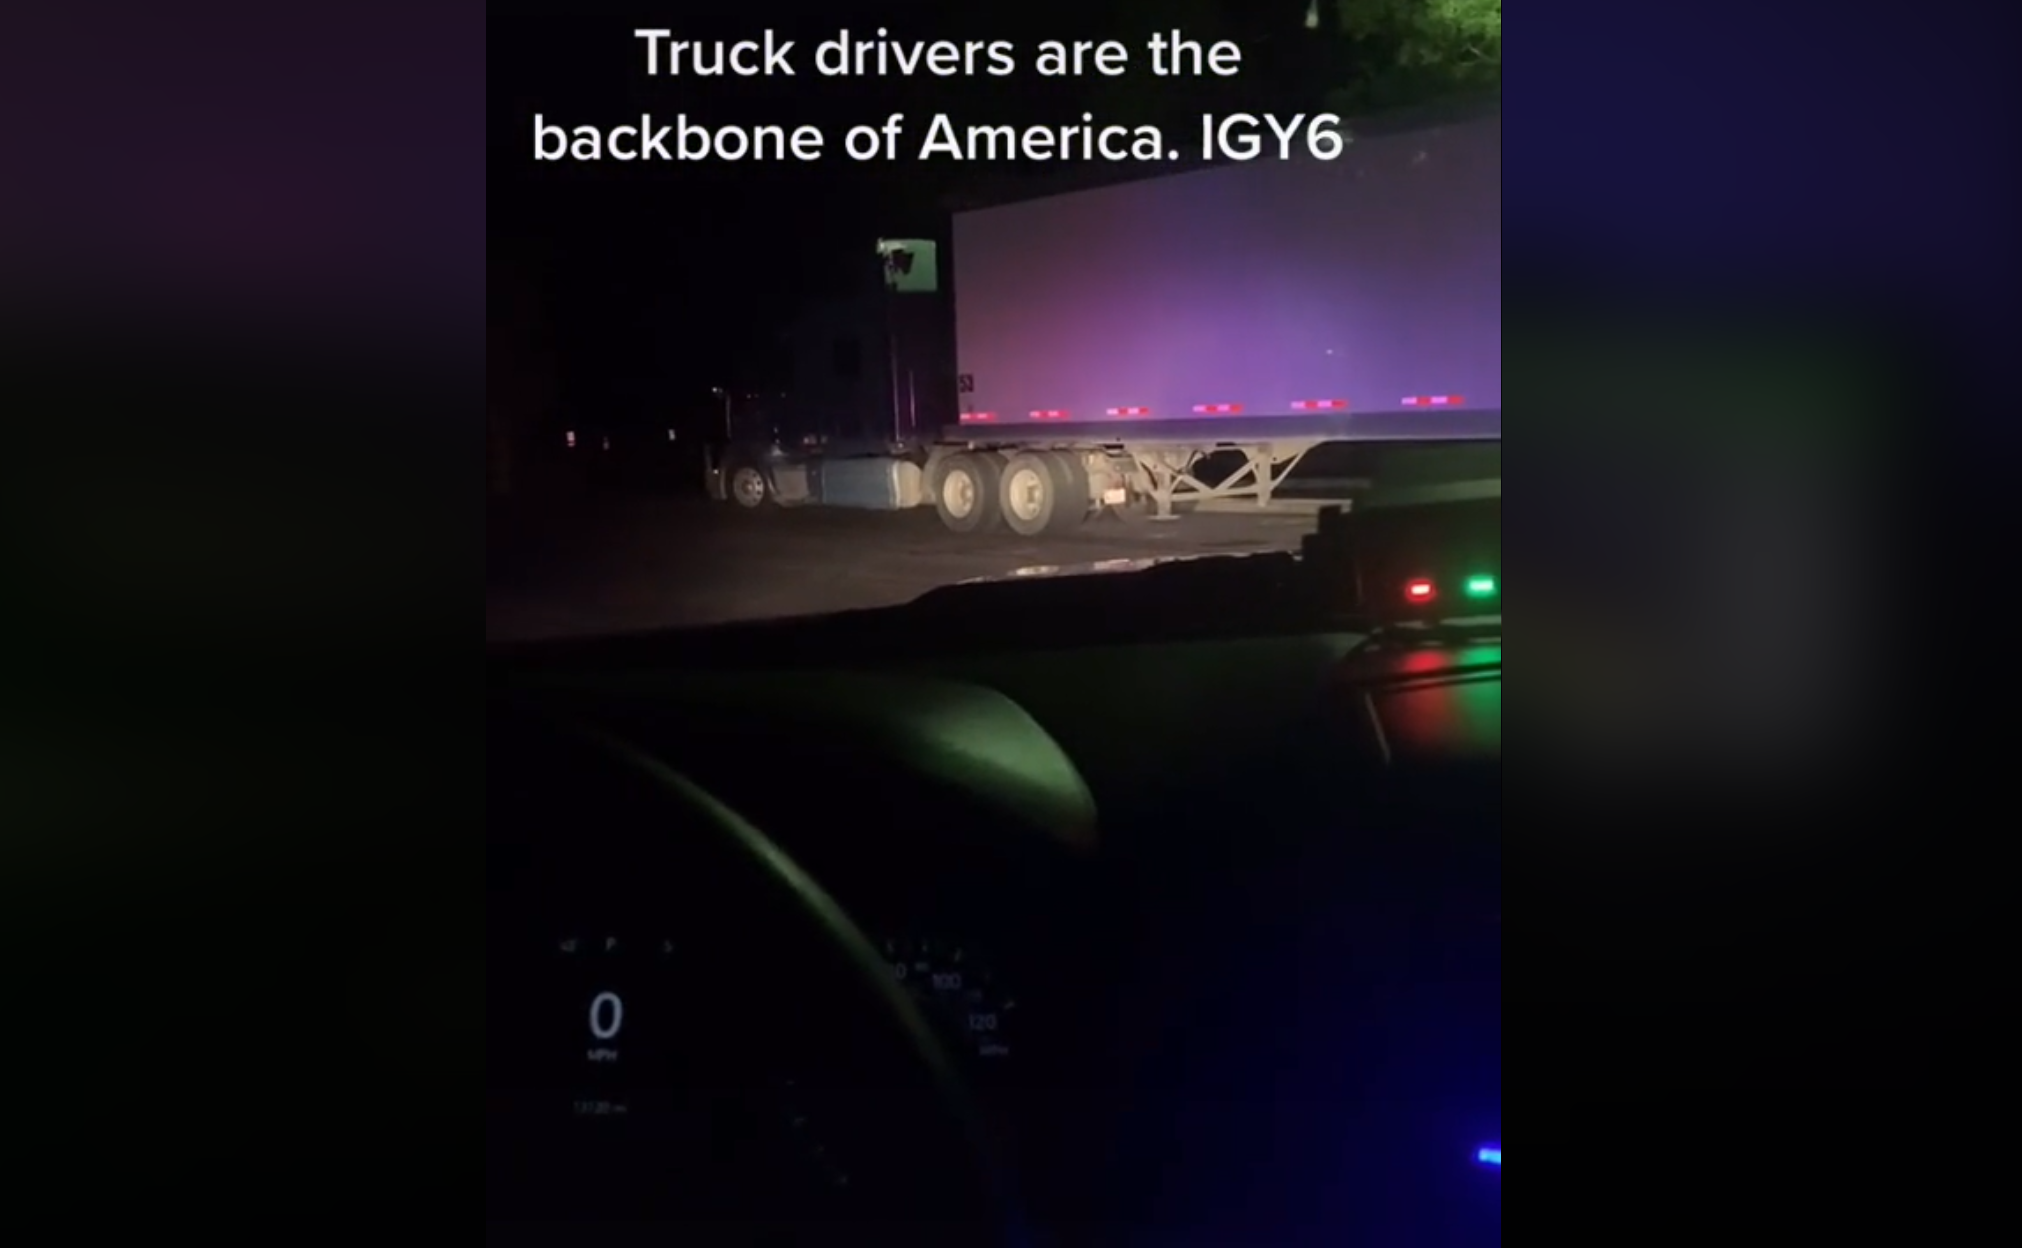 VIDEO: Police officer spends extra time patrolling near parked semi trucks to protect drivers from danger